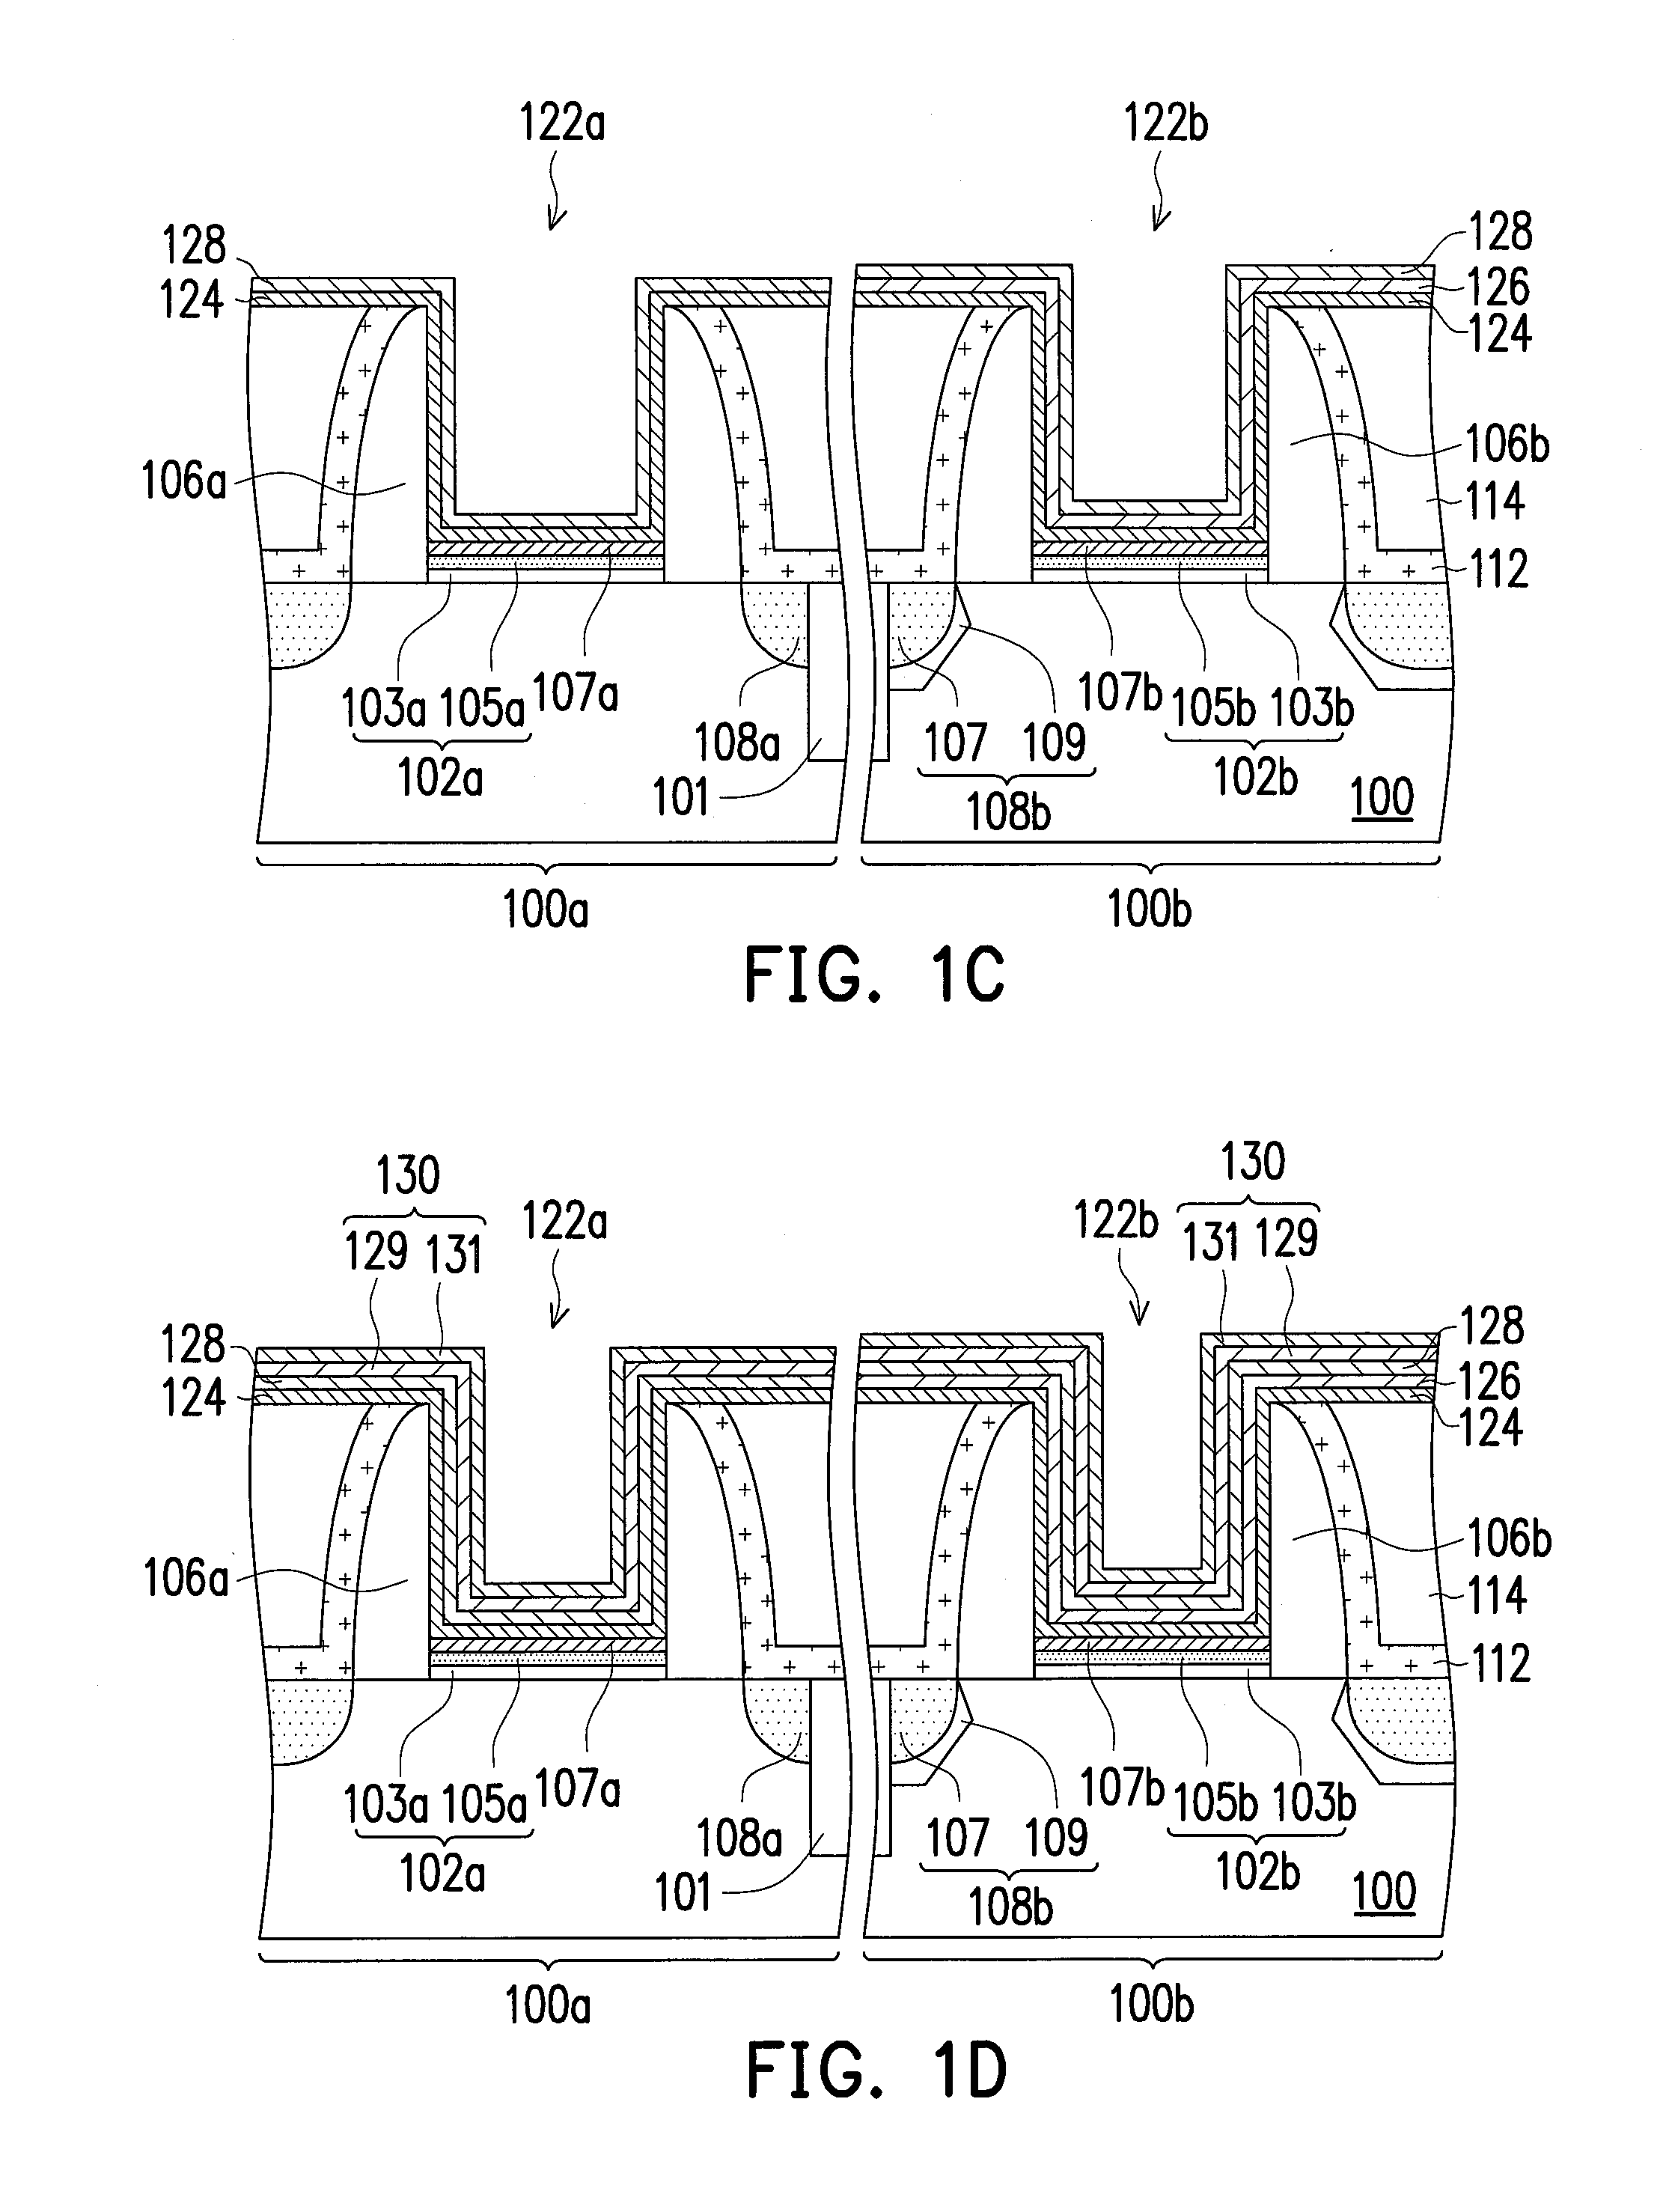 Semiconductor structure and method of forming the same